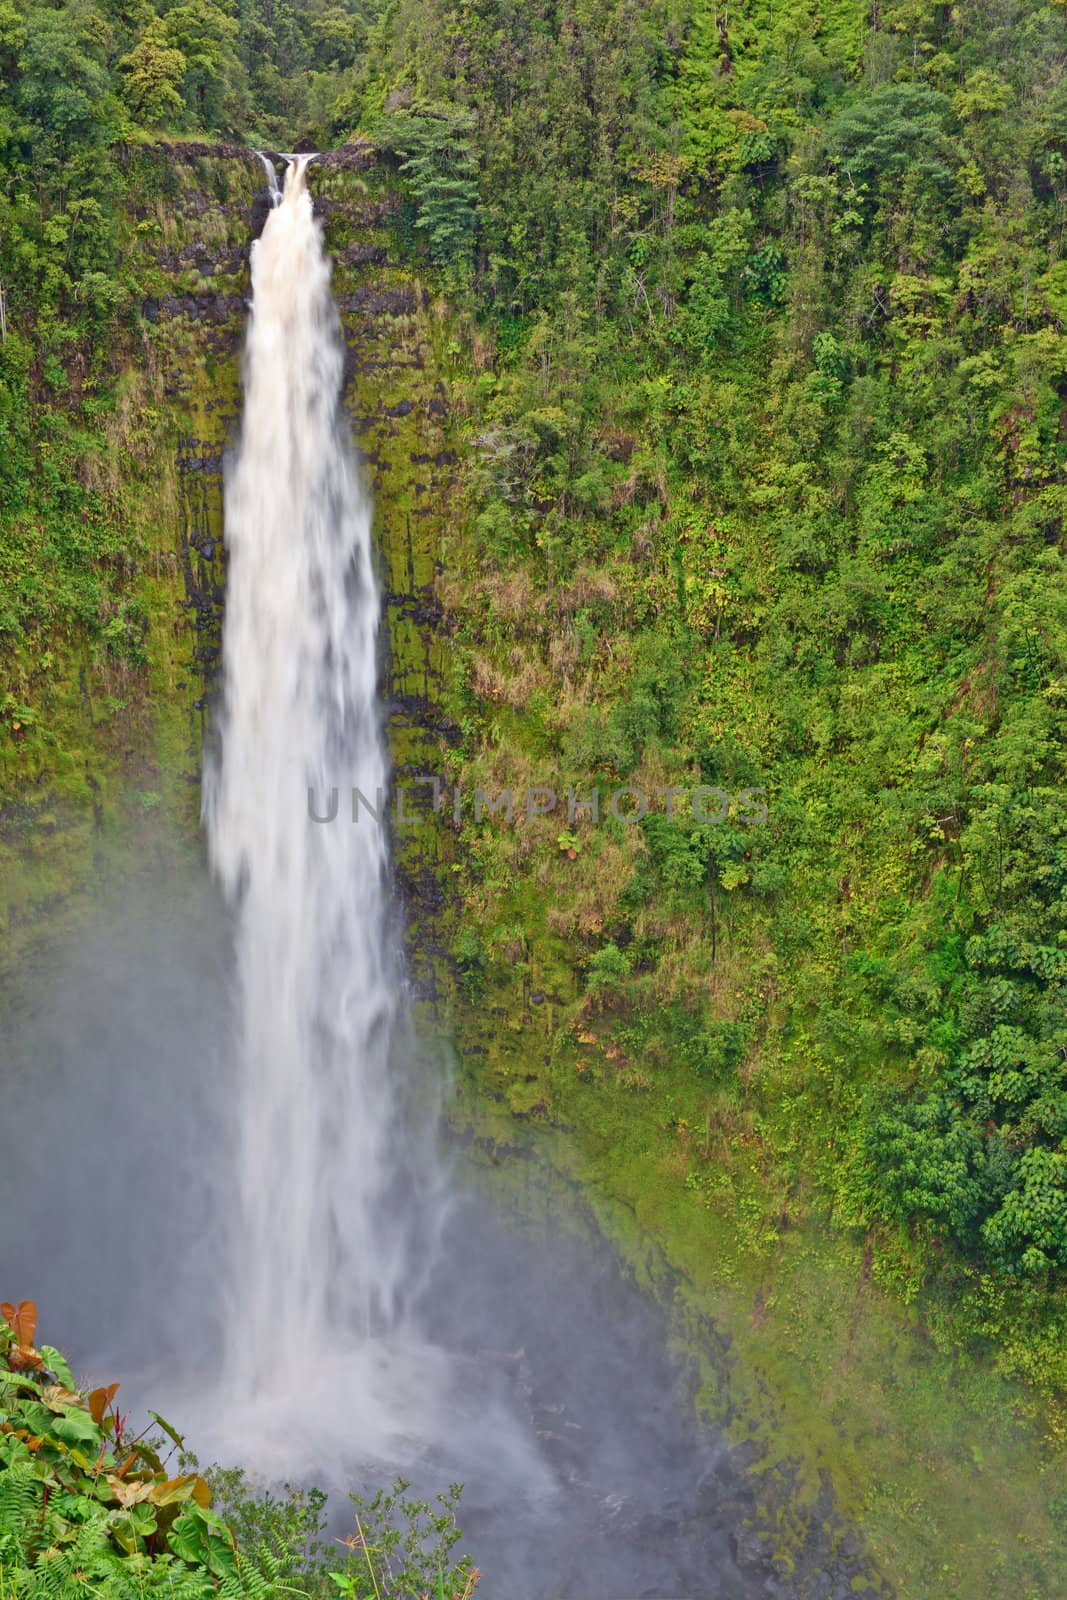 The Akaka Falls on Big Island of Hawaii are one of the most beautiful waterfalls of the world